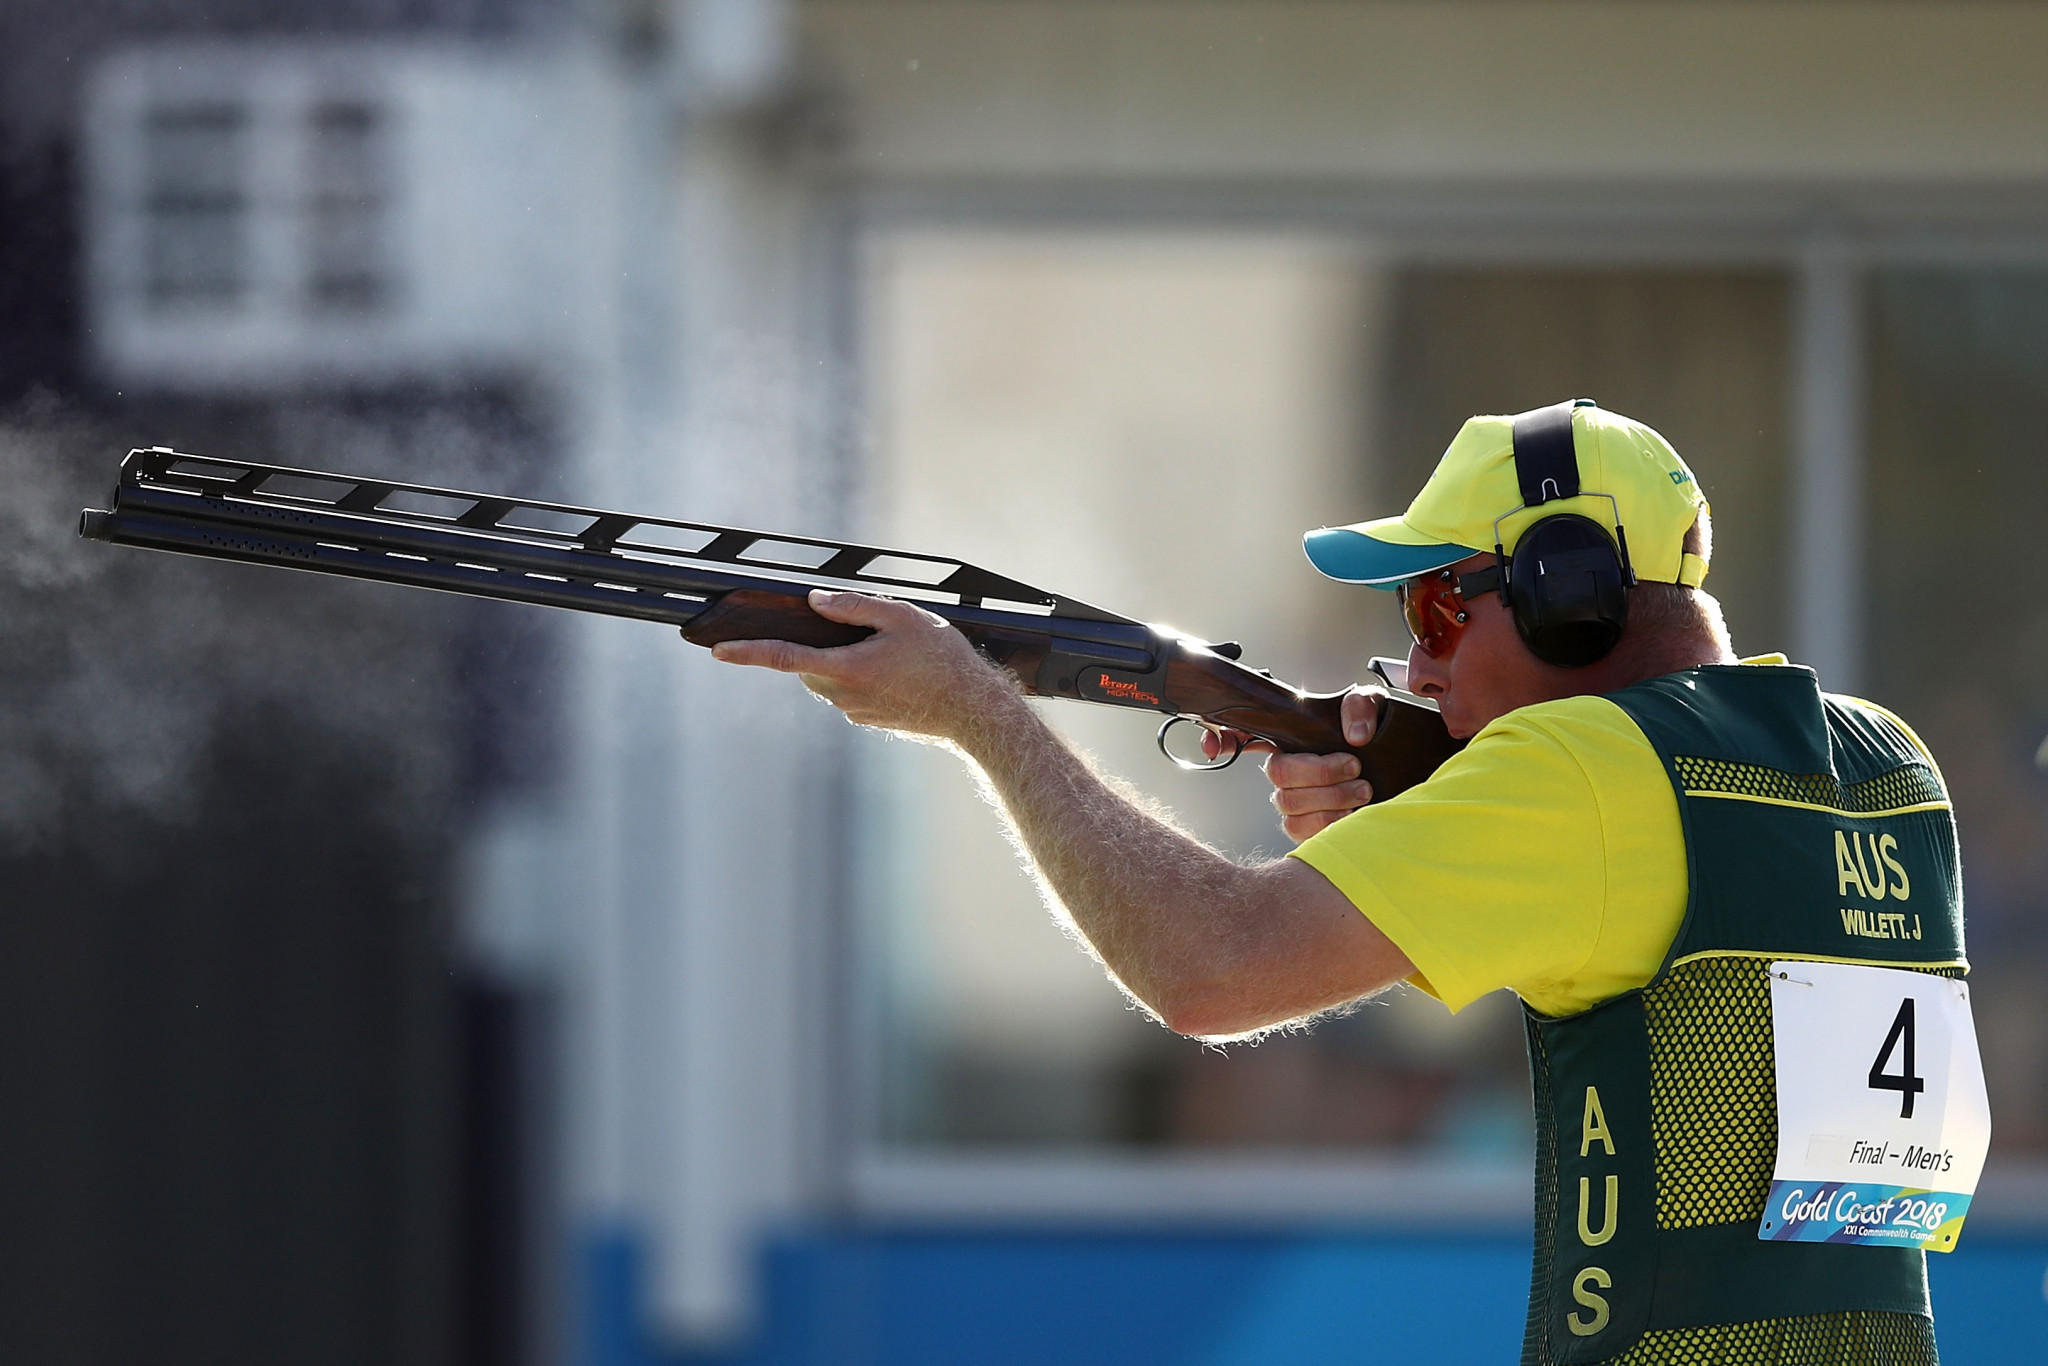 James Willett made it two gold medals in two days at the International Shooting Sport Federation World Cup in Acapulco ©Getty Images